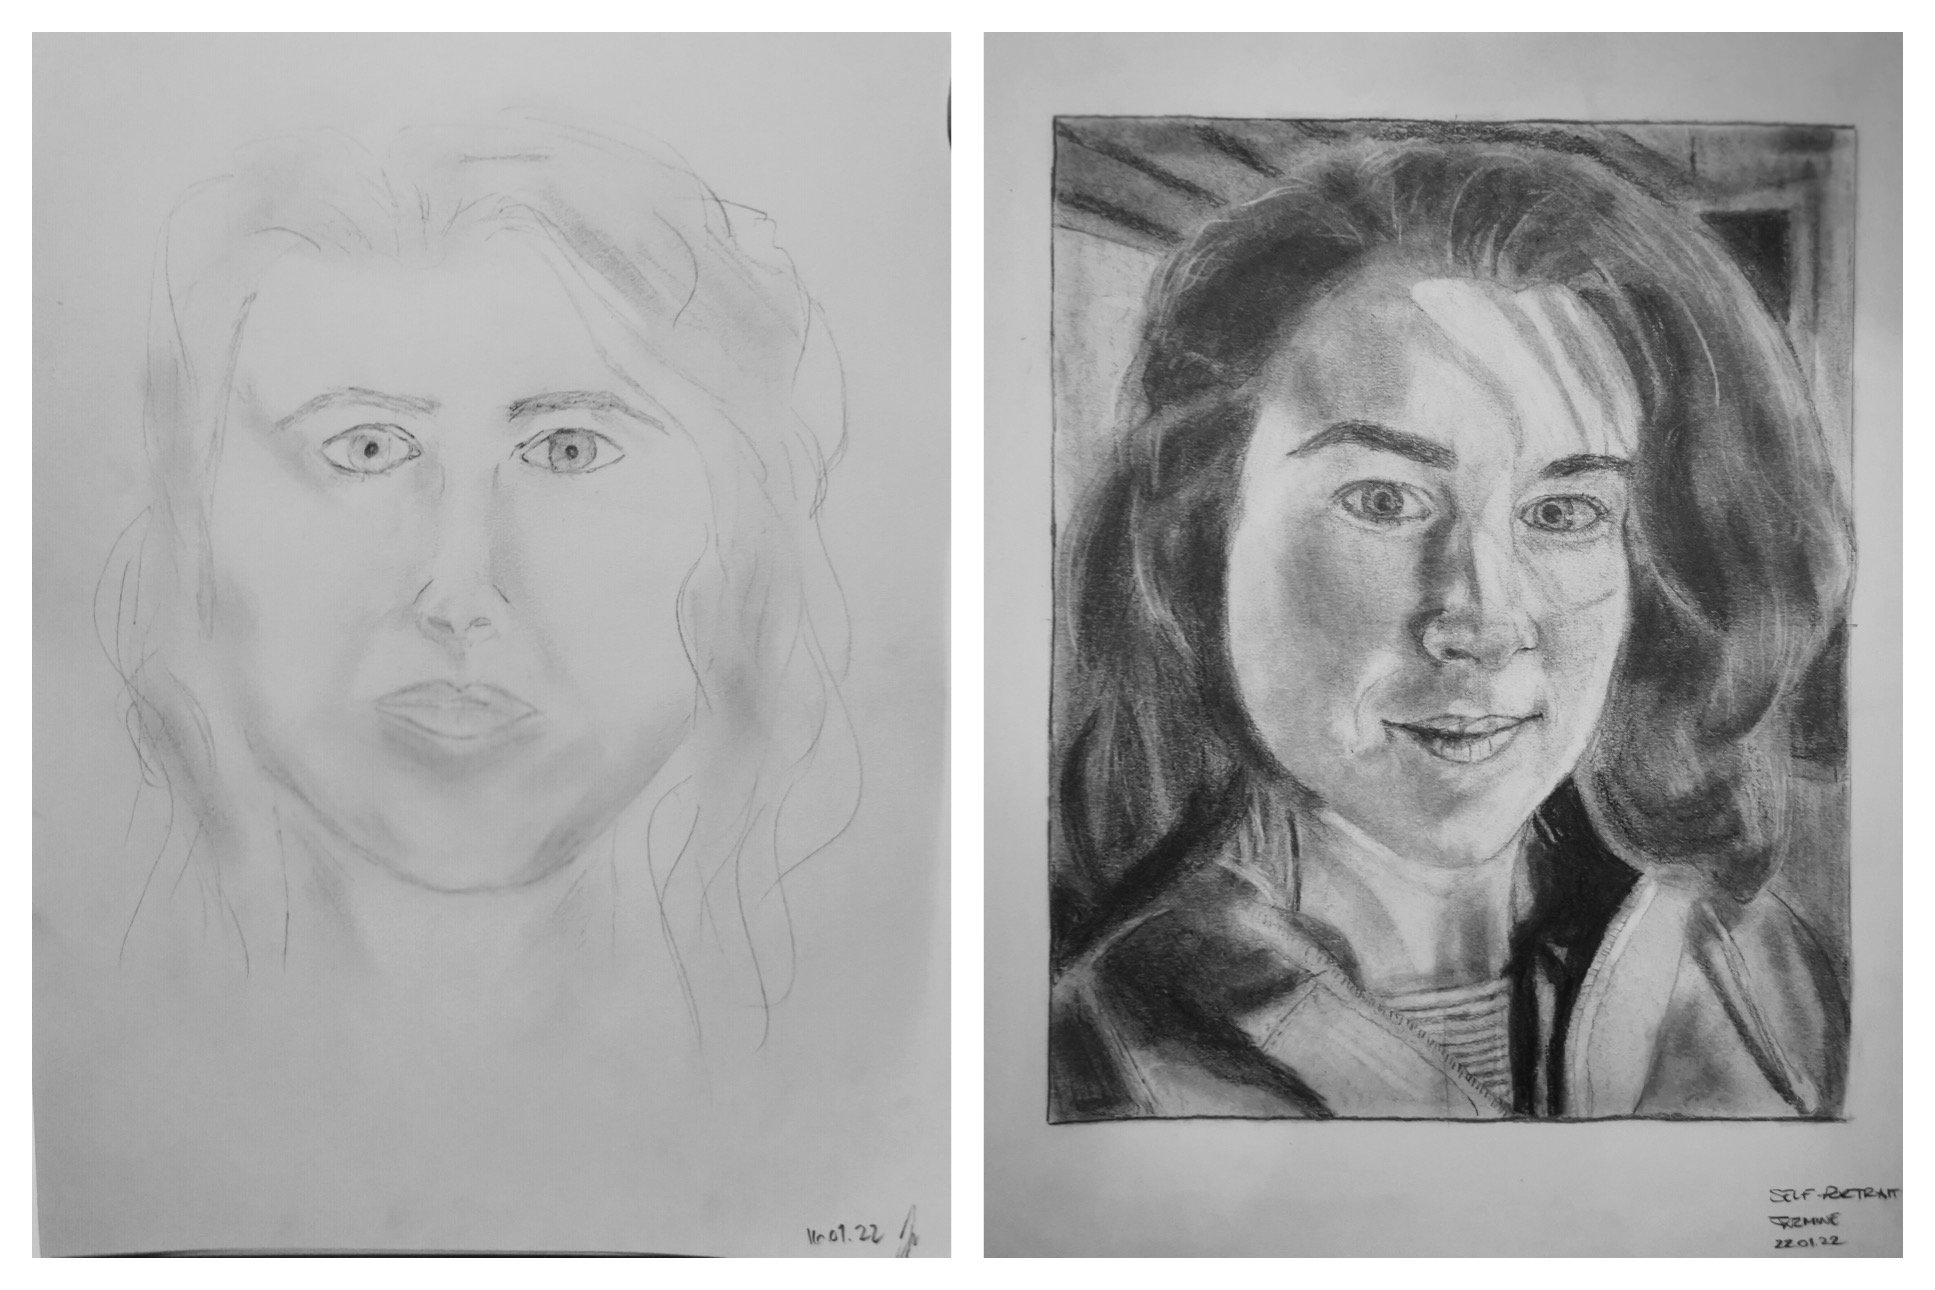 Jazmine D's Before and After Self-Portraits January 17-22, 2022